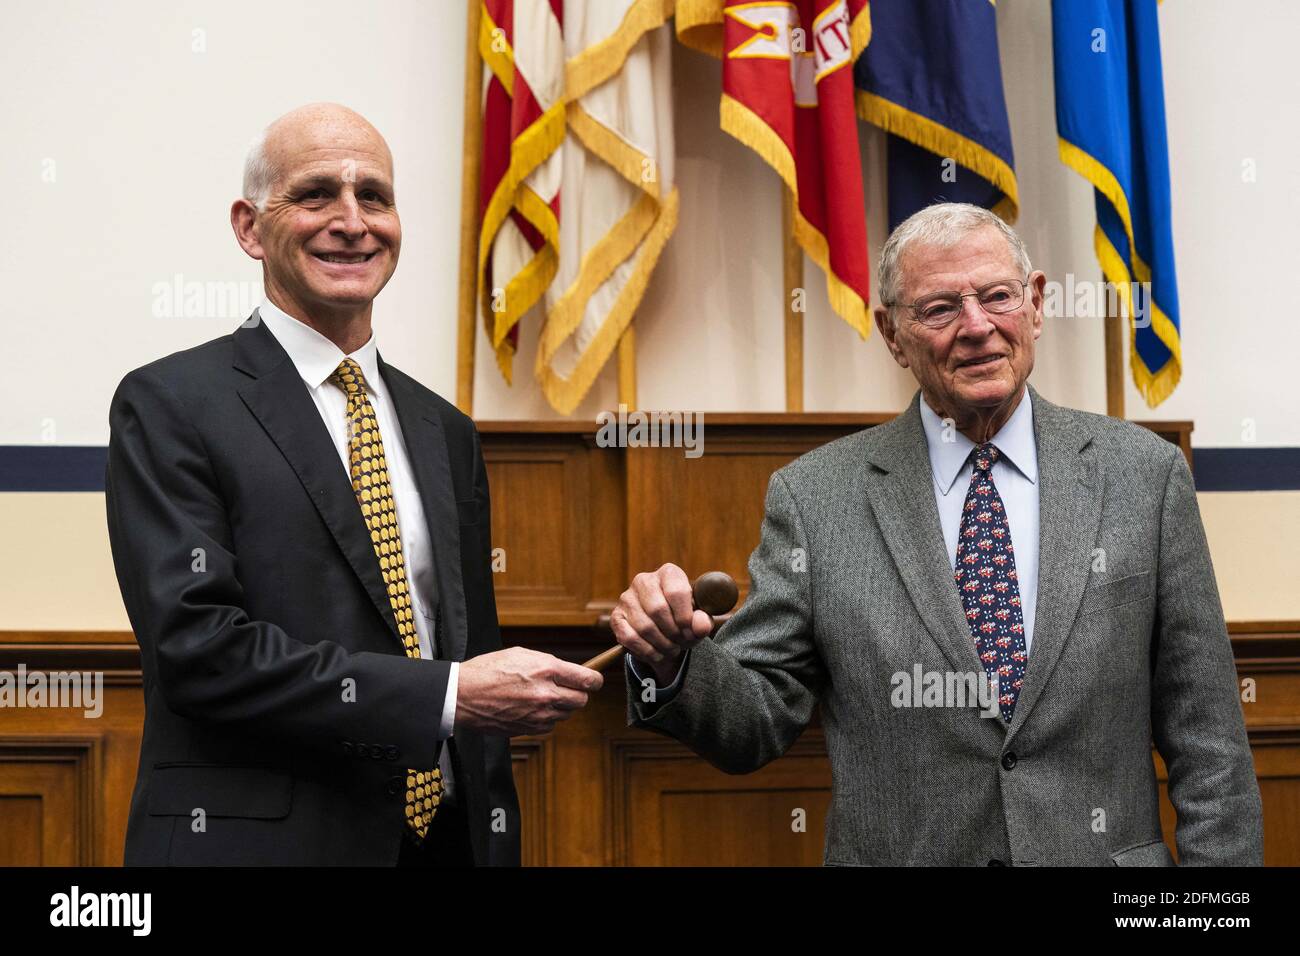 Leaders of the House and Senate Armed Services Committees Congressman Adam Smith (L) and Senator James Inhofe (R) participate in a ceremonial gavel passing in the Rayburn House Office Building in Washington, DC, USA, November 18, 2020. Photo by Bonnie Cash/Pool/ABACAPRESS.COM Stock Photo